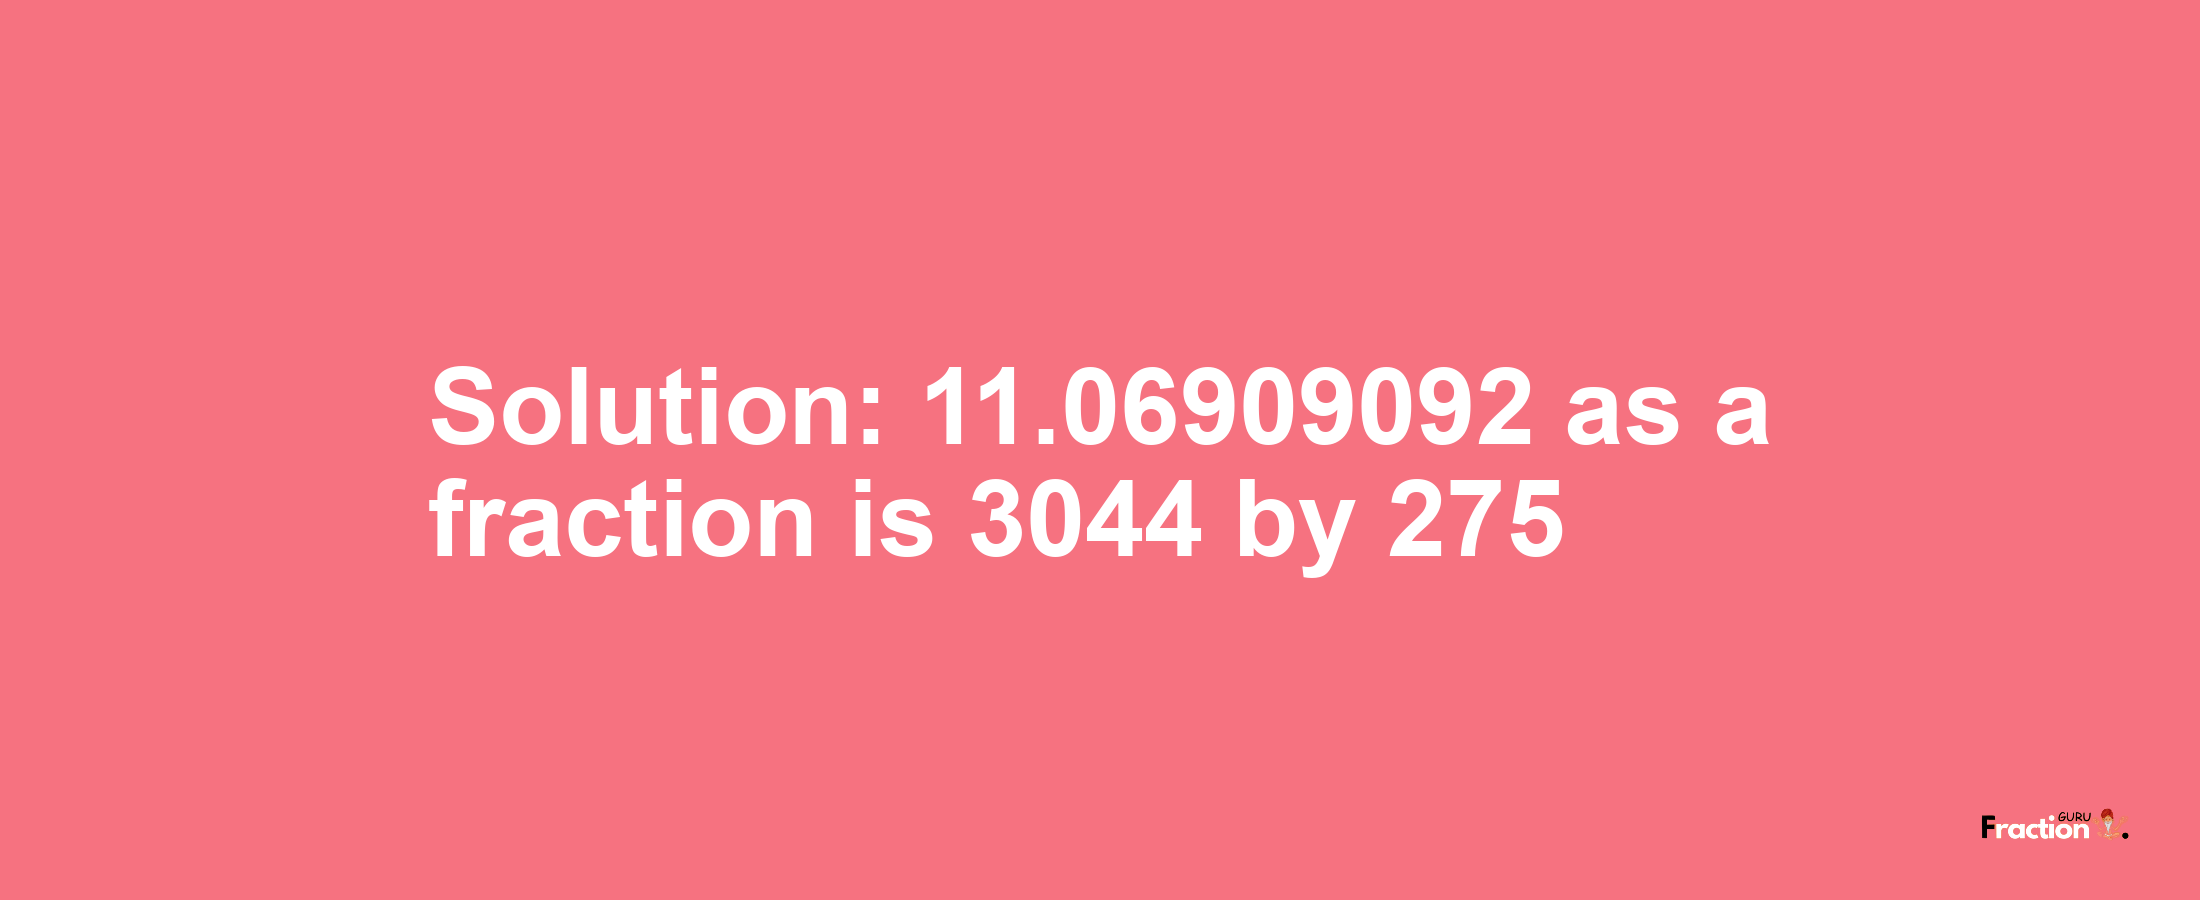 Solution:11.06909092 as a fraction is 3044/275